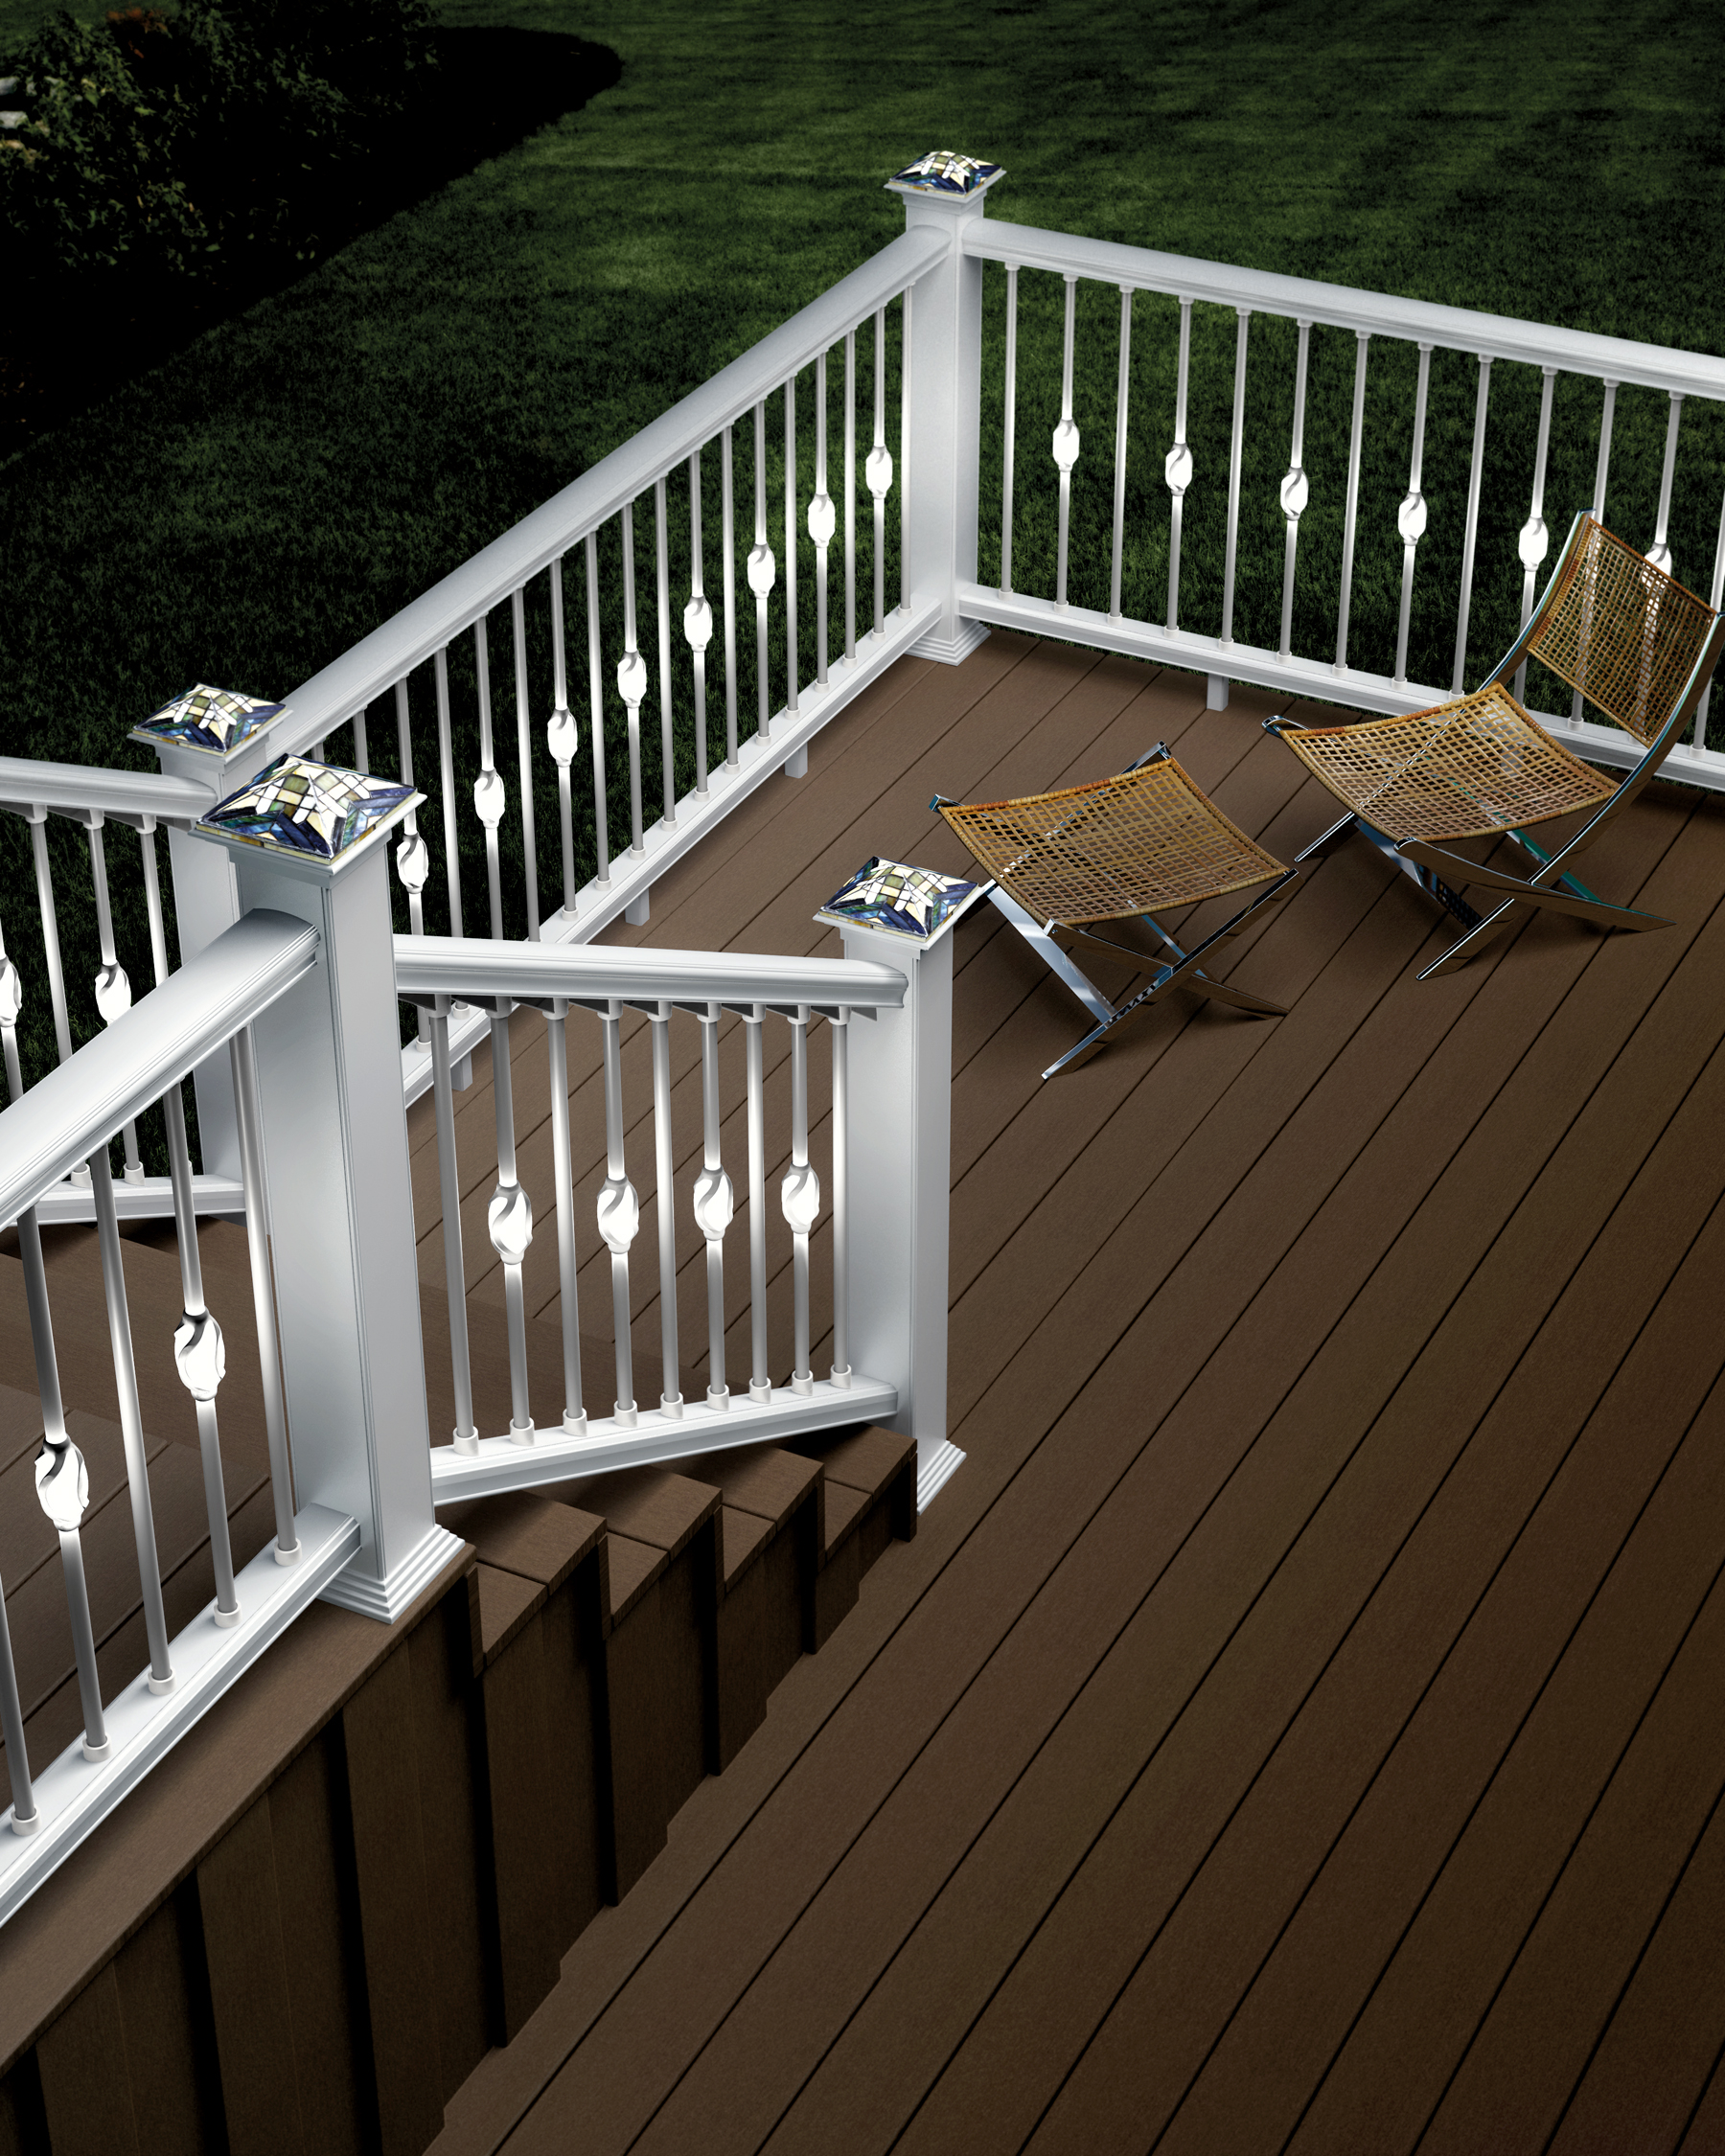 Deckorators Introduces New Low Voltage Accent Lighting For Decks And pertaining to proportions 1800 X 2250